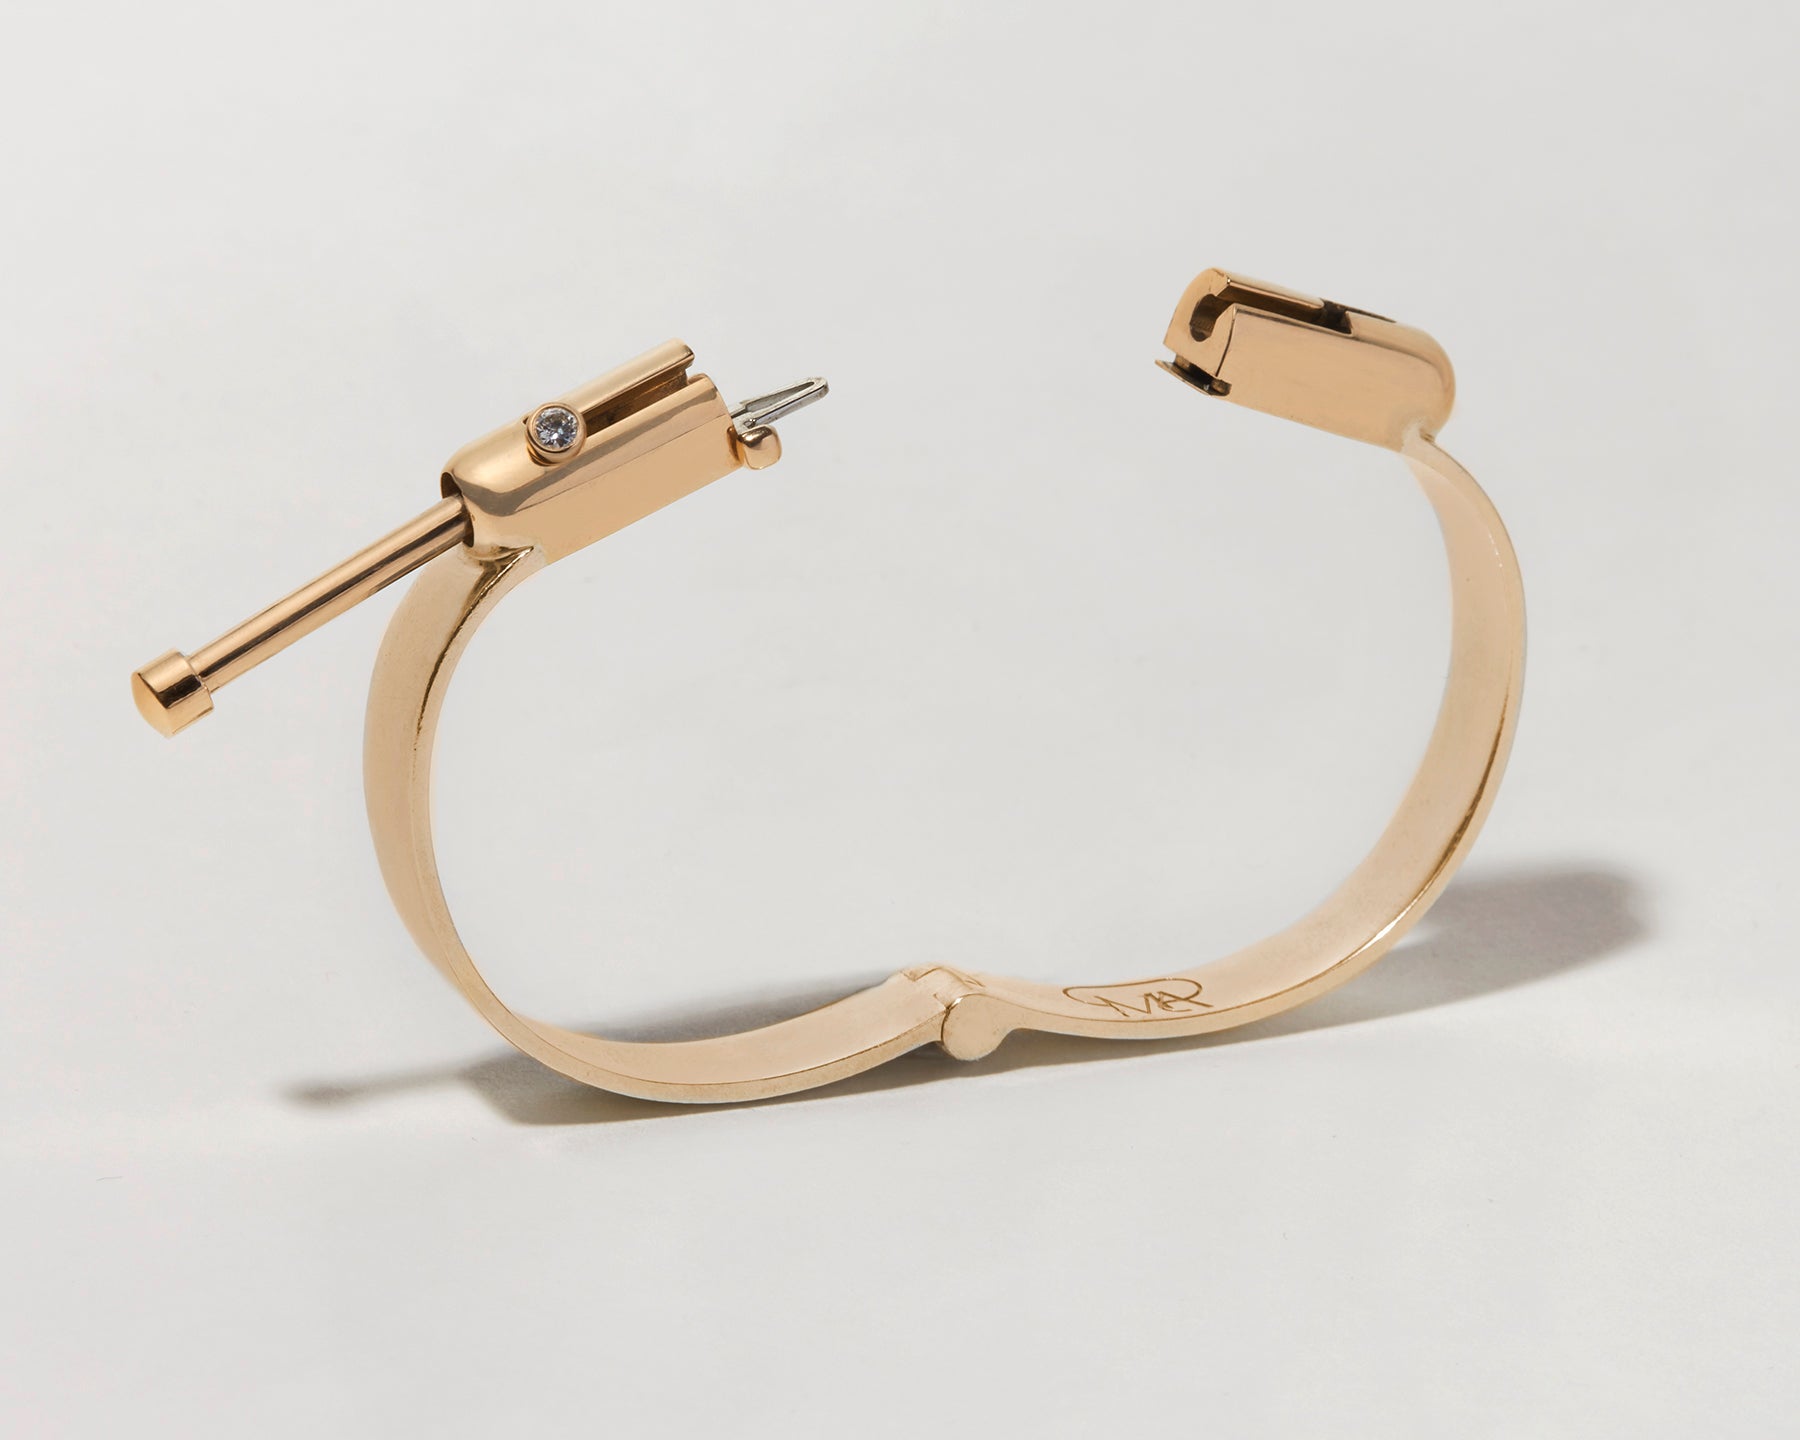 Angled front shot of gold clasp bracelet with clasp open against white backdrop